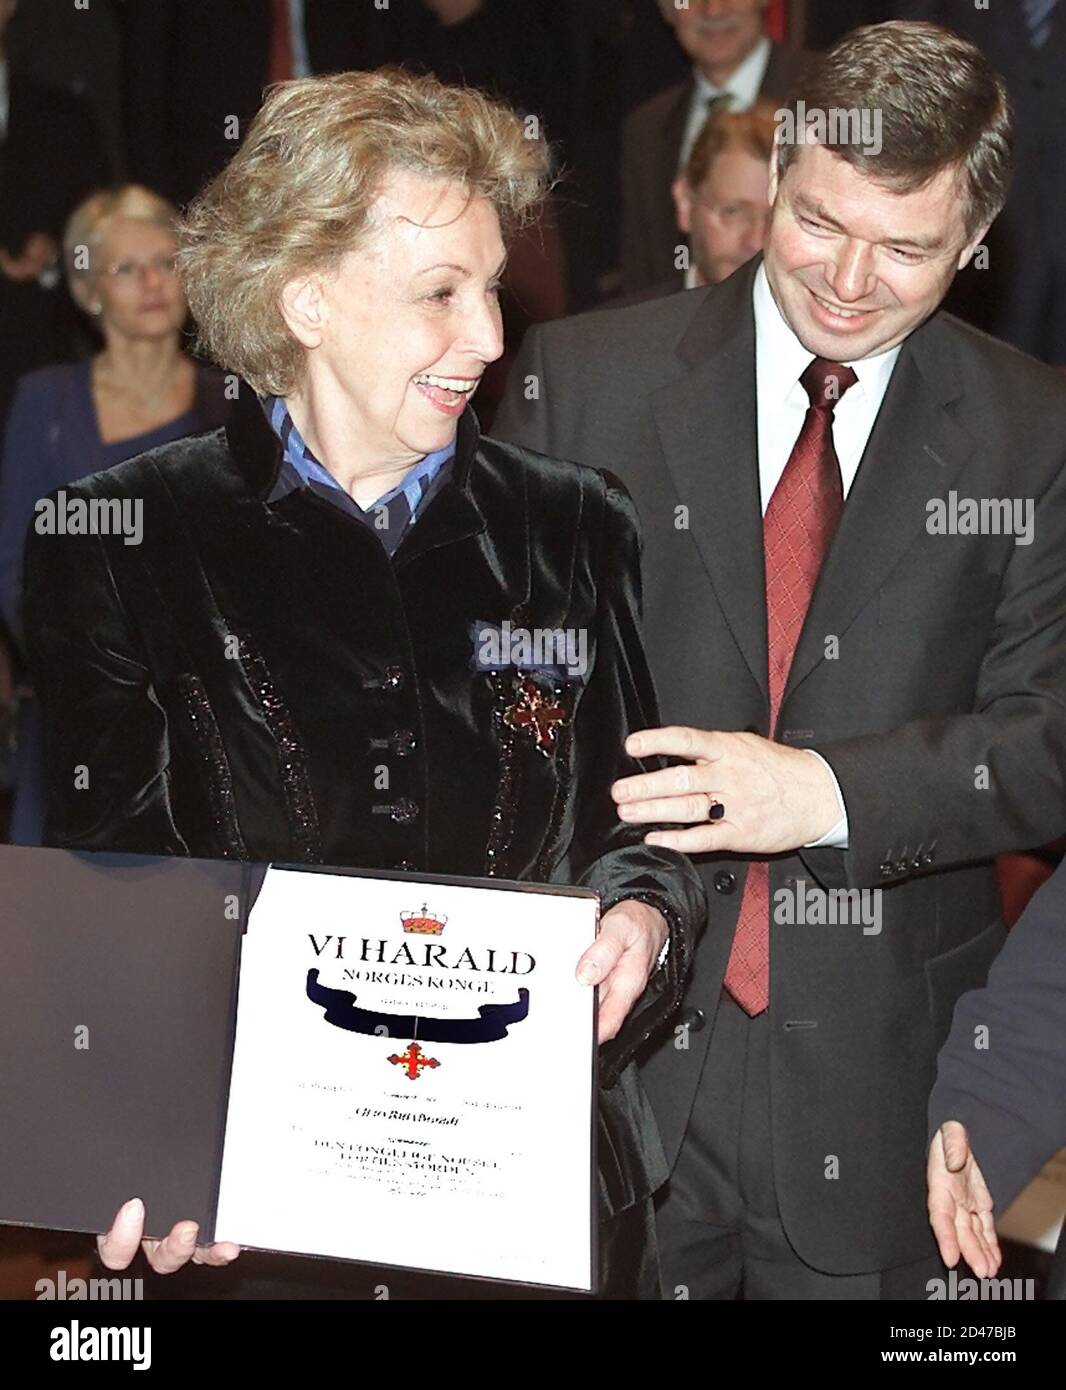 Rut Brandt (L), widow of former German Chancellor Willy Brandt smiles after she was honoured by the Norwegian Prime Minister Kjell Bondevik during a ceremony at the Norwegian embassy in Berlin December 3, 2001. Rut Brandt was honoured with the Norwegian royal medal for her services to Norway. REUTERS/Tobias Schwarz REUTERS  FAB/JOH Stock Photo